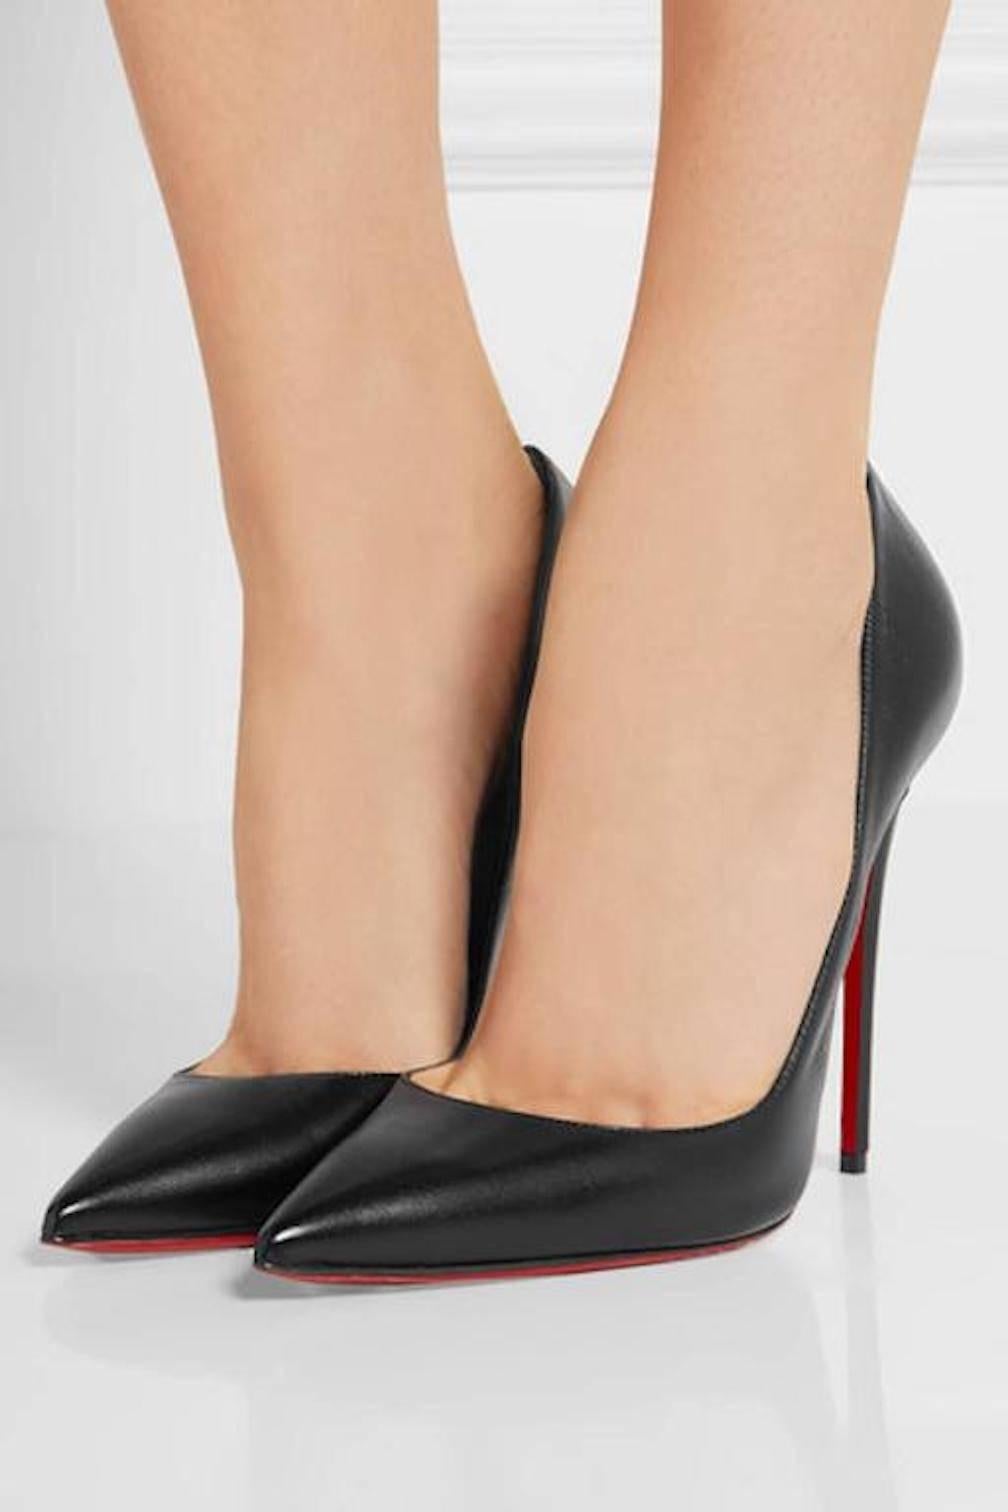 CURATOR'S NOTES  

LAST PAIR! Christian Louboutin New Black Leather SO Kate High Heels Pumps in Box   

Size IT 41.5 - Not your size?  Message us to help you find yours.
Leather 
Slip on 
Made in Italy 
Heel height 5" (120mm)
Includes original